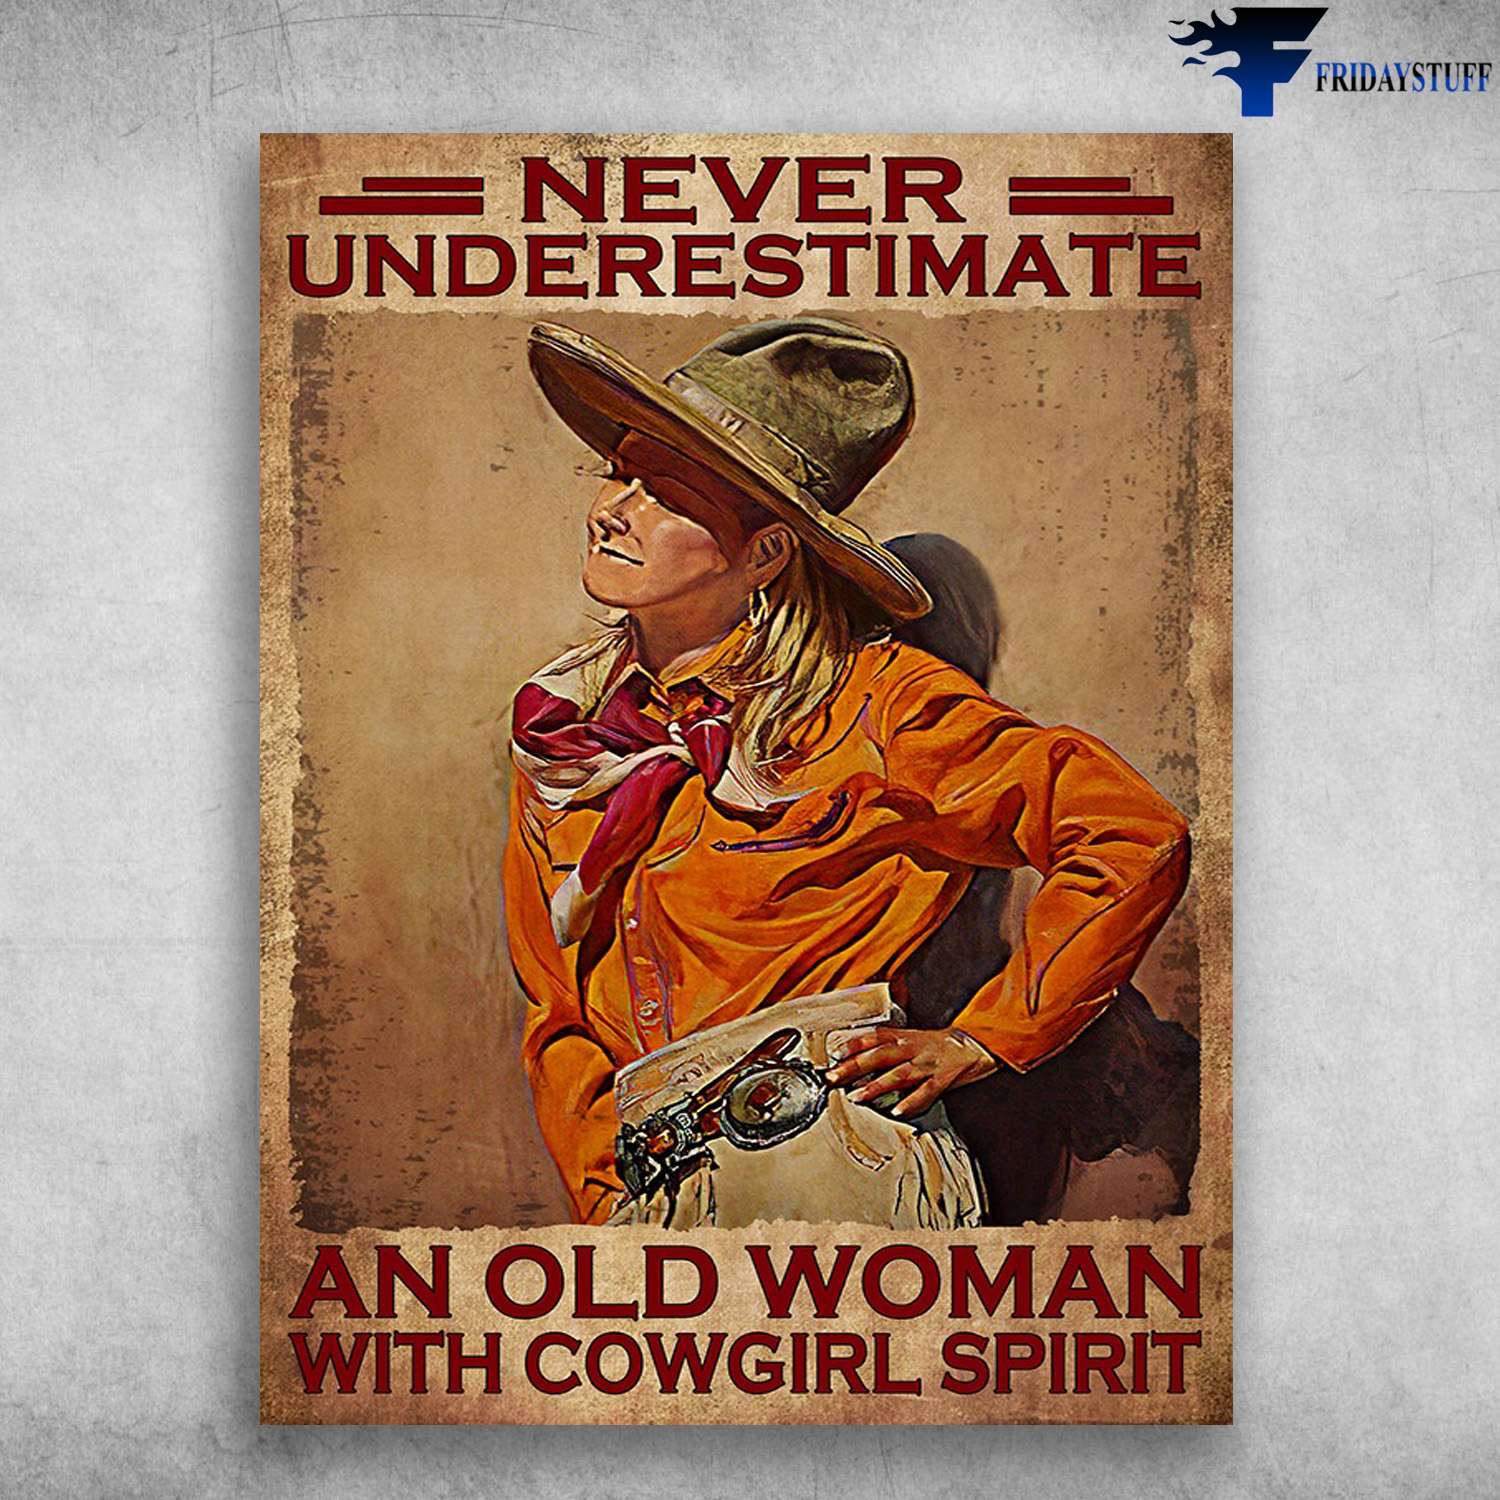 Cowgirl Poster, Cowboy Lover - Never Underestimate An Old Woman, With Cowgirl Spirit